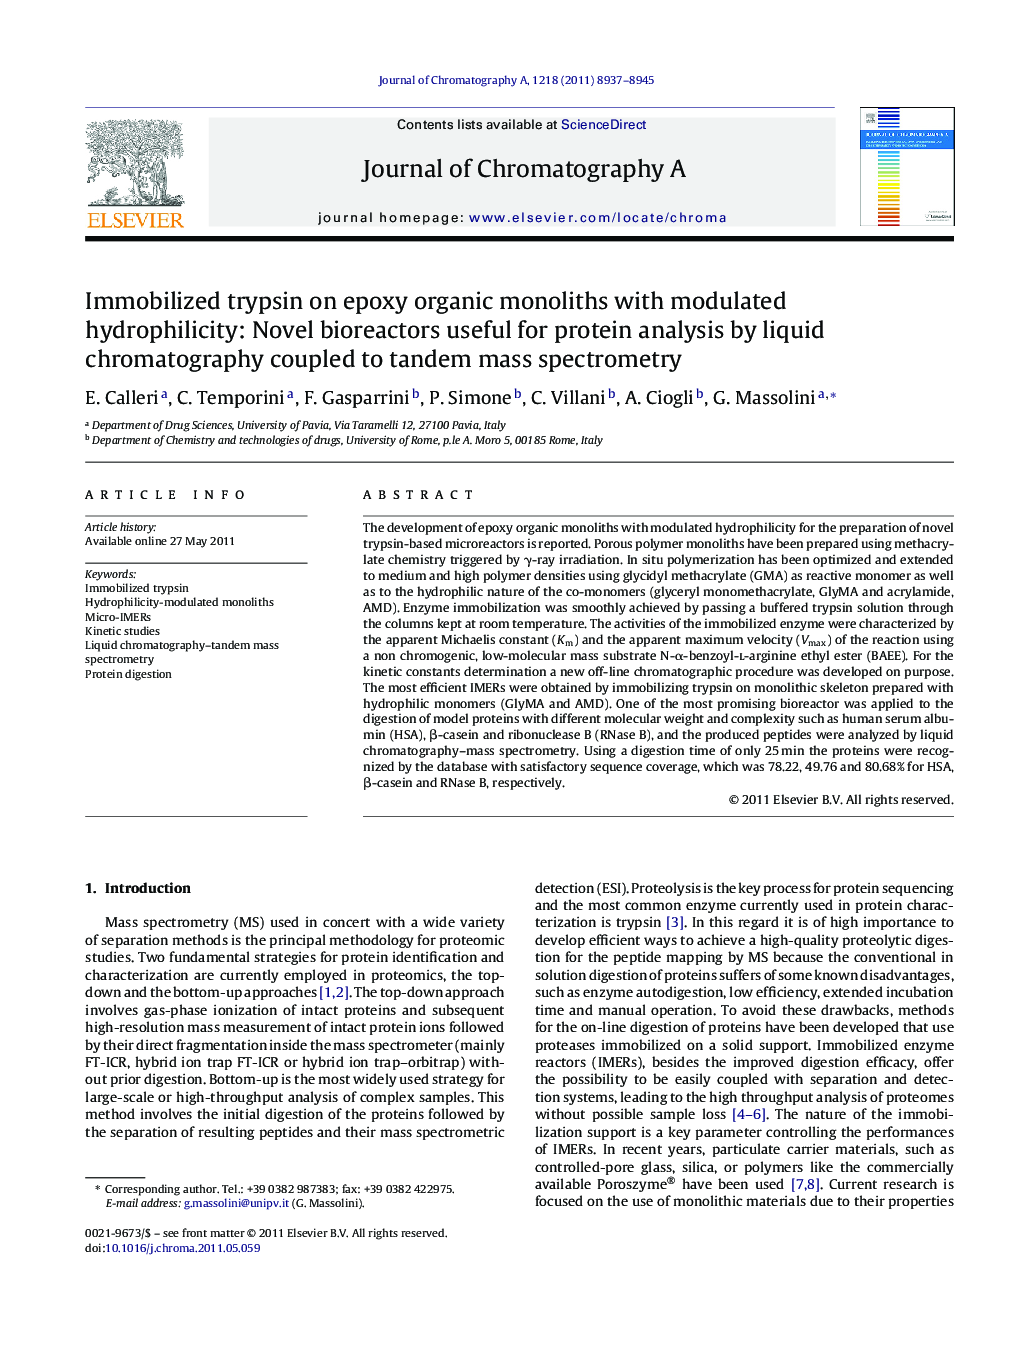 Immobilized trypsin on epoxy organic monoliths with modulated hydrophilicity: Novel bioreactors useful for protein analysis by liquid chromatography coupled to tandem mass spectrometry